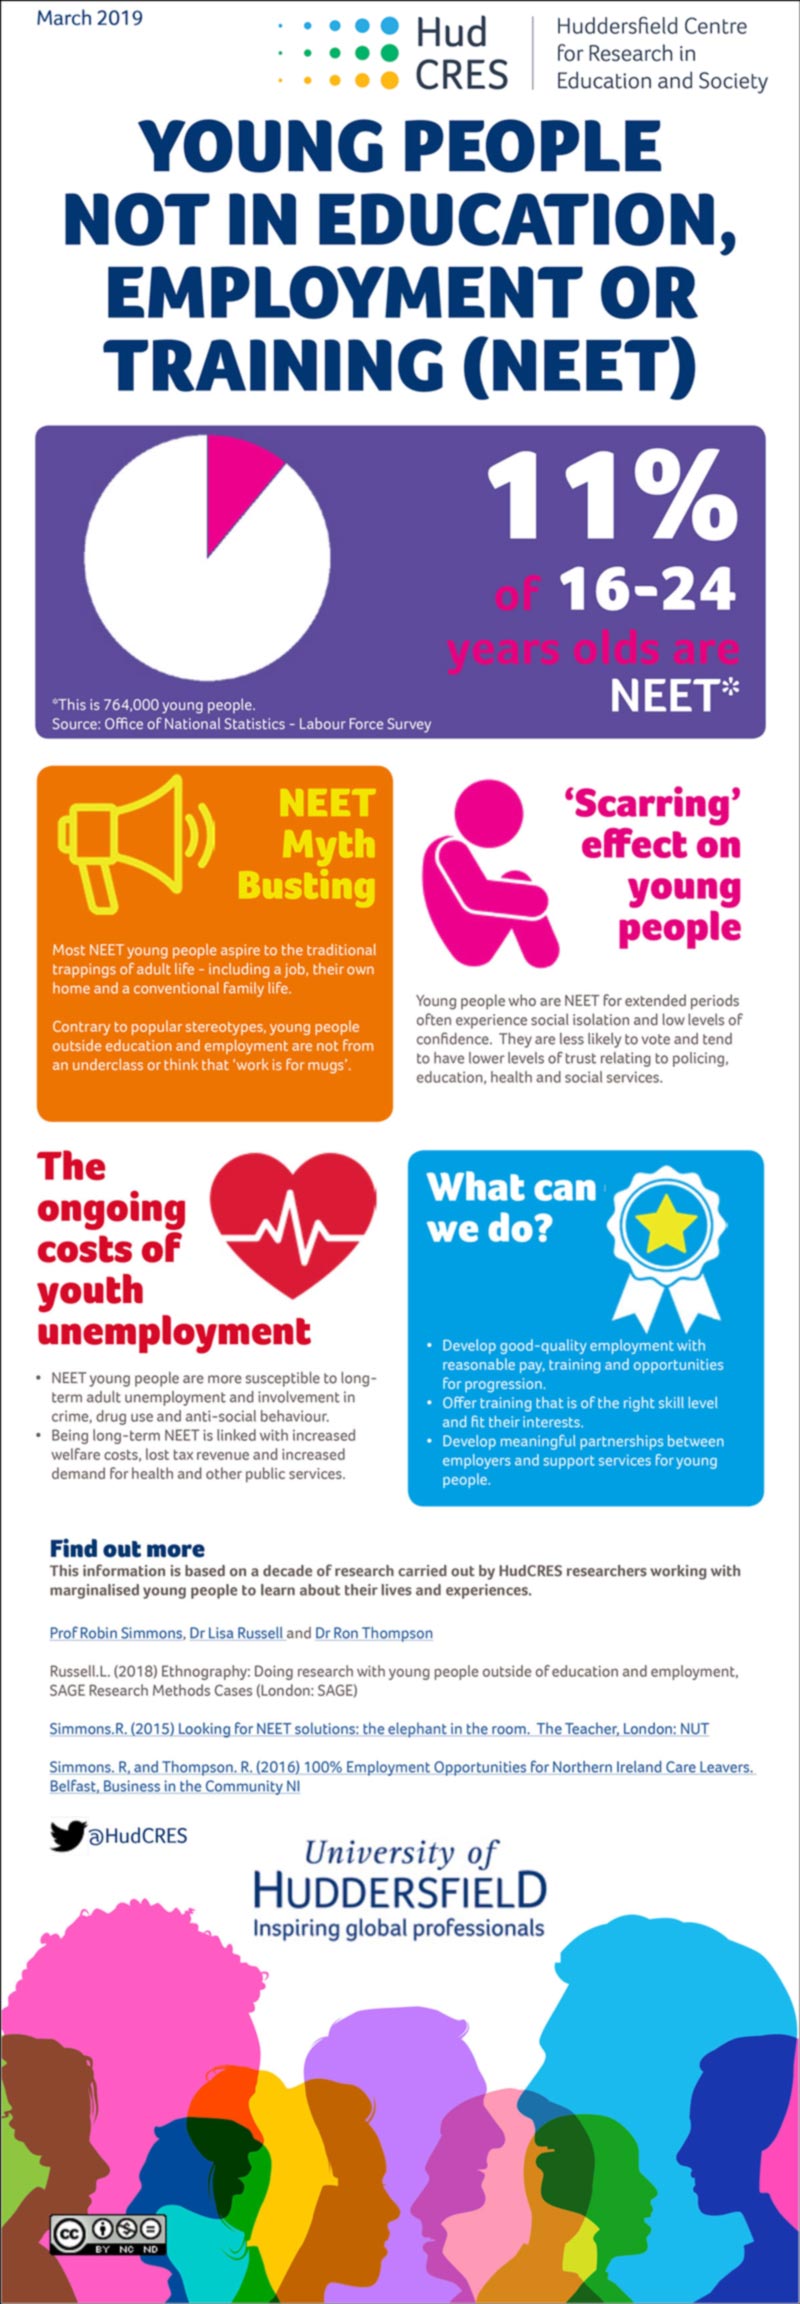 Infographic - NEET - nor in Education, Employment or Training